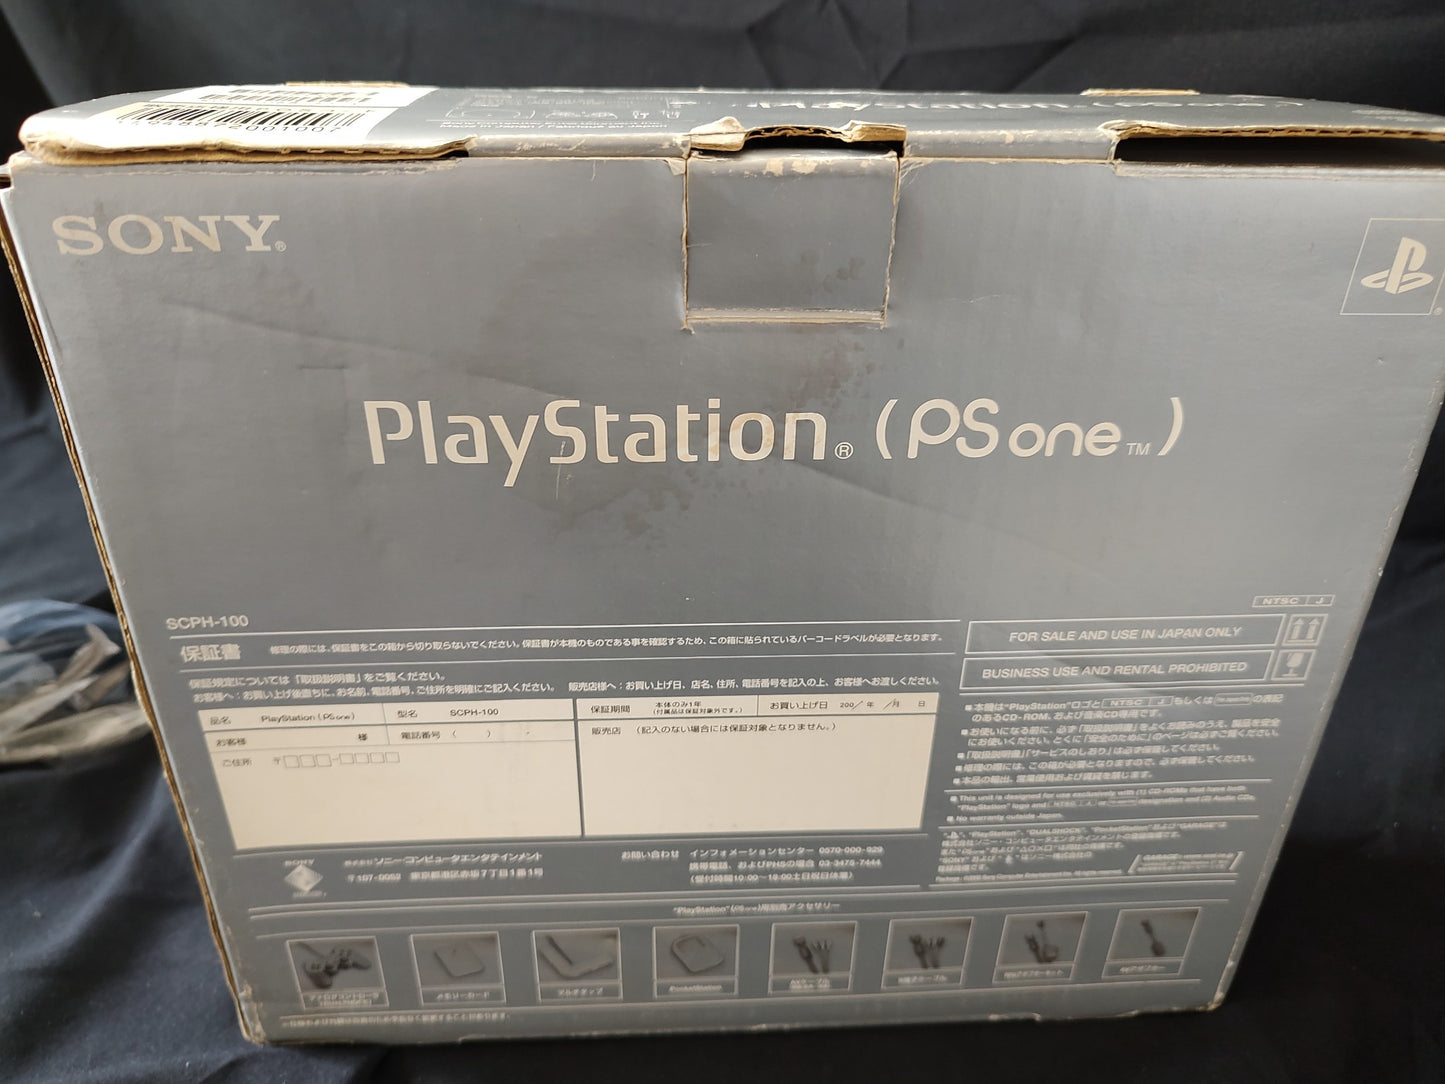 Sony PlayStation PS one Console,LCD monitor,PSU and Controller set NTSC-J-f0607-